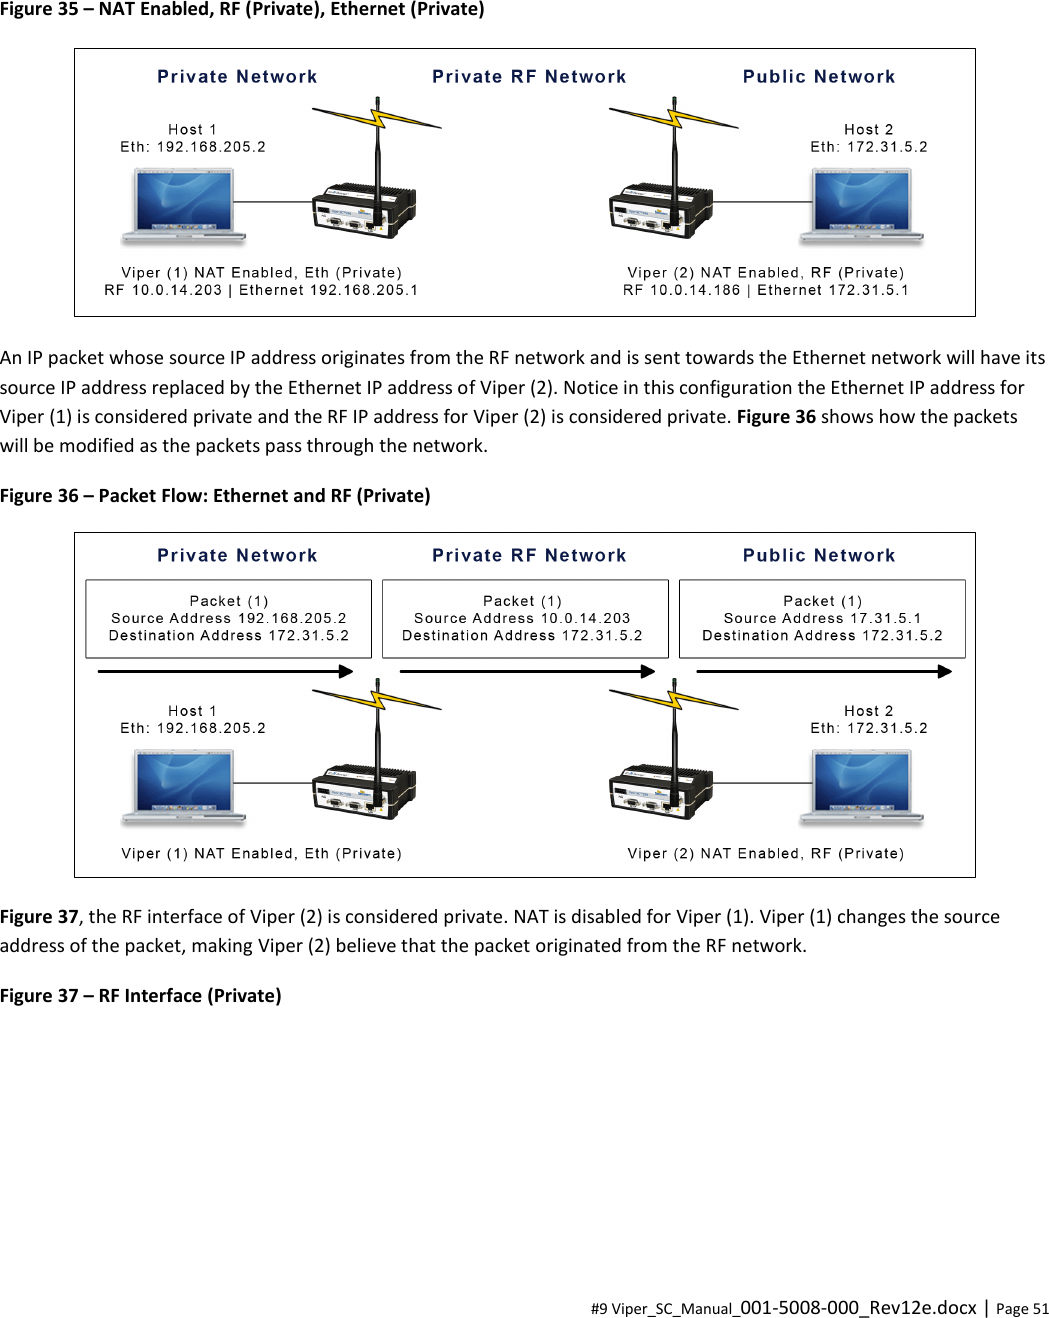  #9 Viper_SC_Manual_001-5008-000_Rev12e.docx | Page 51   Figure 35 – NAT Enabled, RF (Private), Ethernet (Private)  An IP packet whose source IP address originates from the RF network and is sent towards the Ethernet network will have its source IP address replaced by the Ethernet IP address of Viper (2). Notice in this configuration the Ethernet IP address for Viper (1) is considered private and the RF IP address for Viper (2) is considered private. Figure 36 shows how the packets will be modified as the packets pass through the network. Figure 36 – Packet Flow: Ethernet and RF (Private)   Figure 37, the RF interface of Viper (2) is considered private. NAT is disabled for Viper (1). Viper (1) changes the source address of the packet, making Viper (2) believe that the packet originated from the RF network. Figure 37 – RF Interface (Private) 